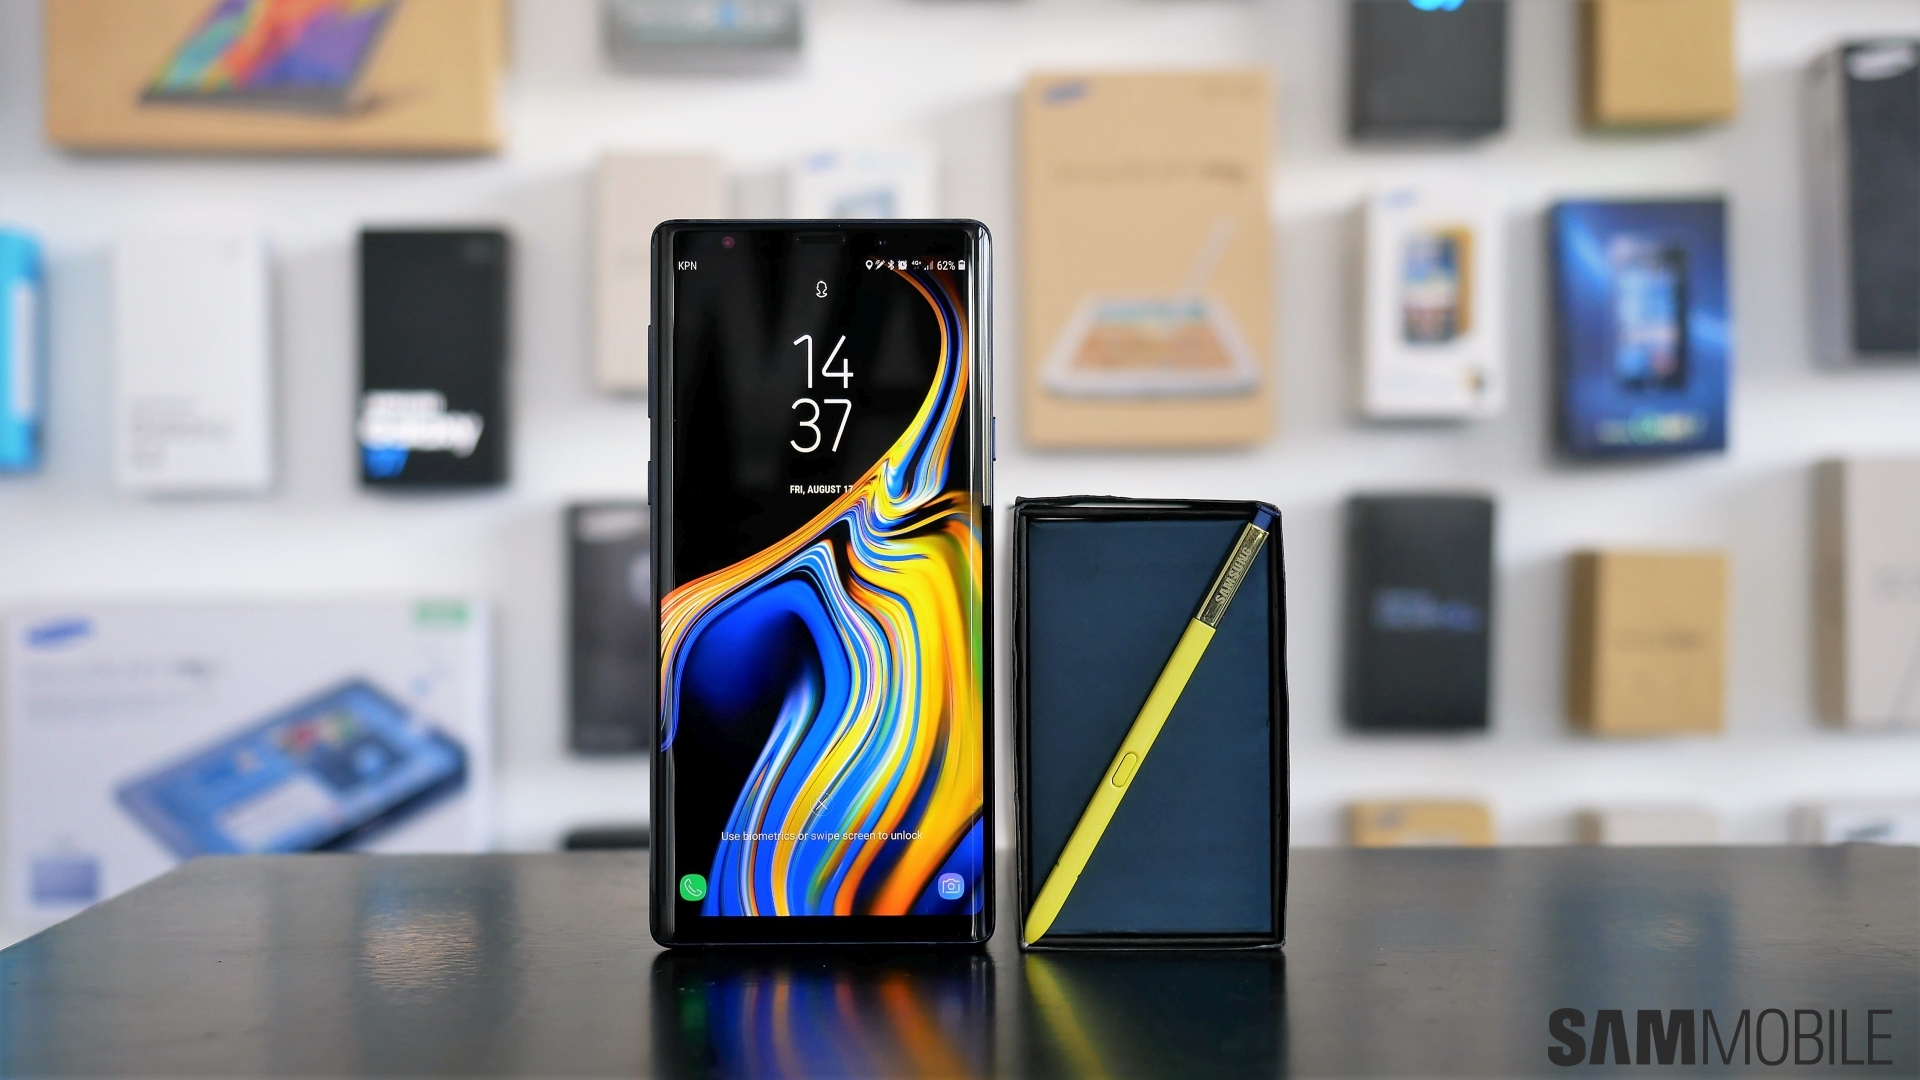 Set A Live Wallpaper On Your Galaxy Note 9 For Added Visual Flair Sammobile